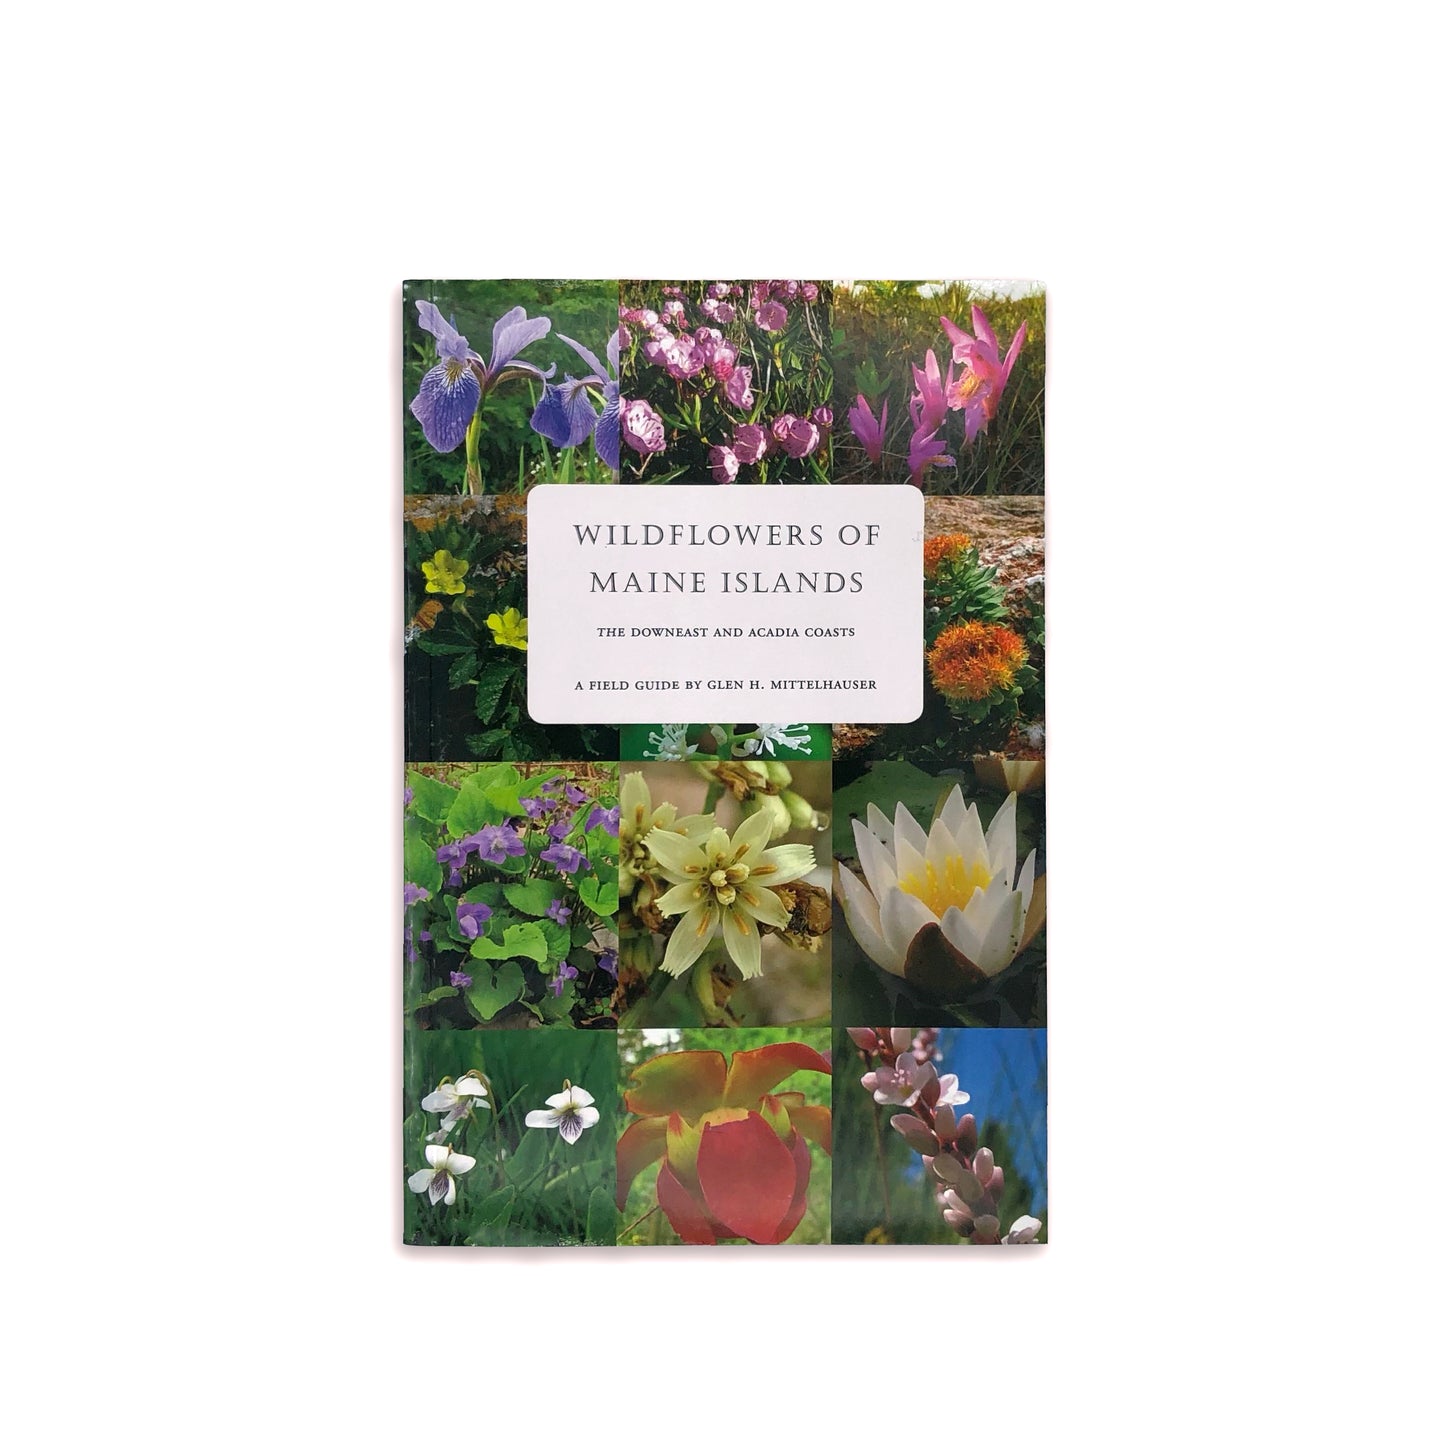 Wildflowers of Maine Islands: The Downeast and Acadia Coasts - Glen H. Mittelhauser (paperback)